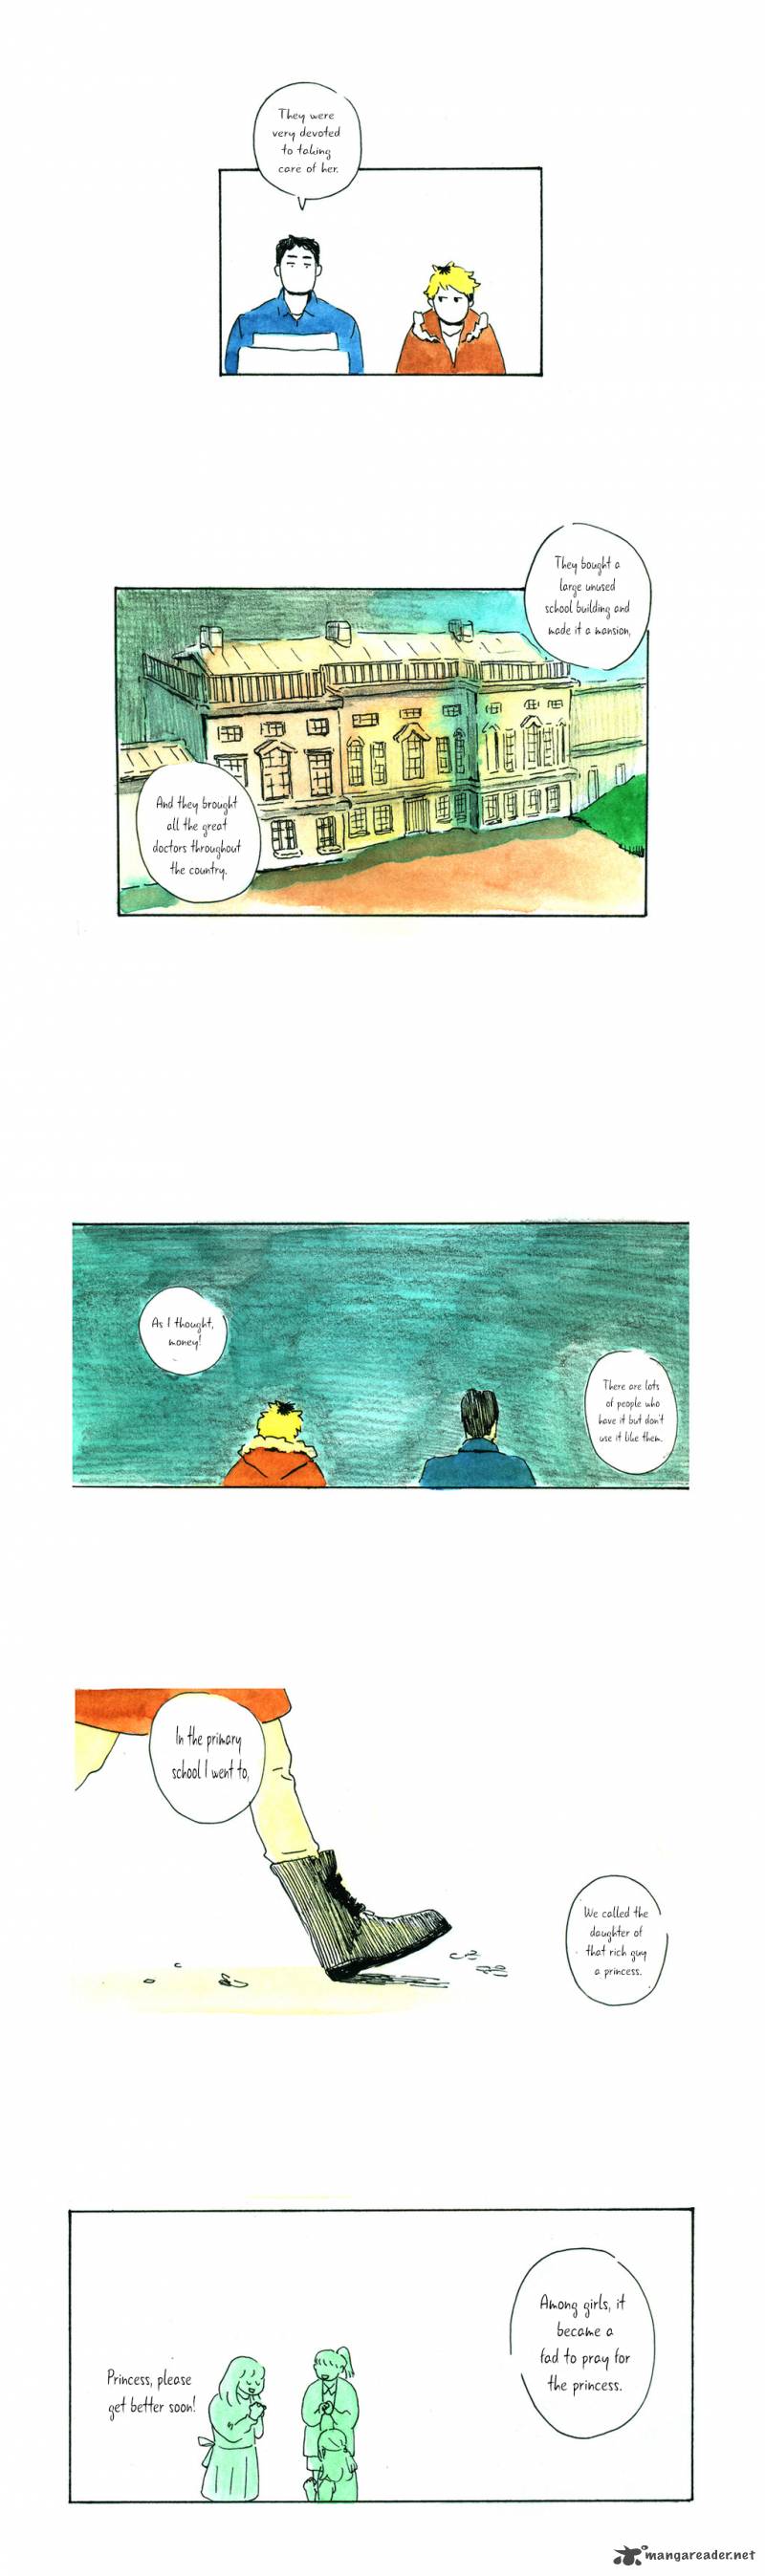 Neither A Long Or Short Walk Chapter 1 Page 5